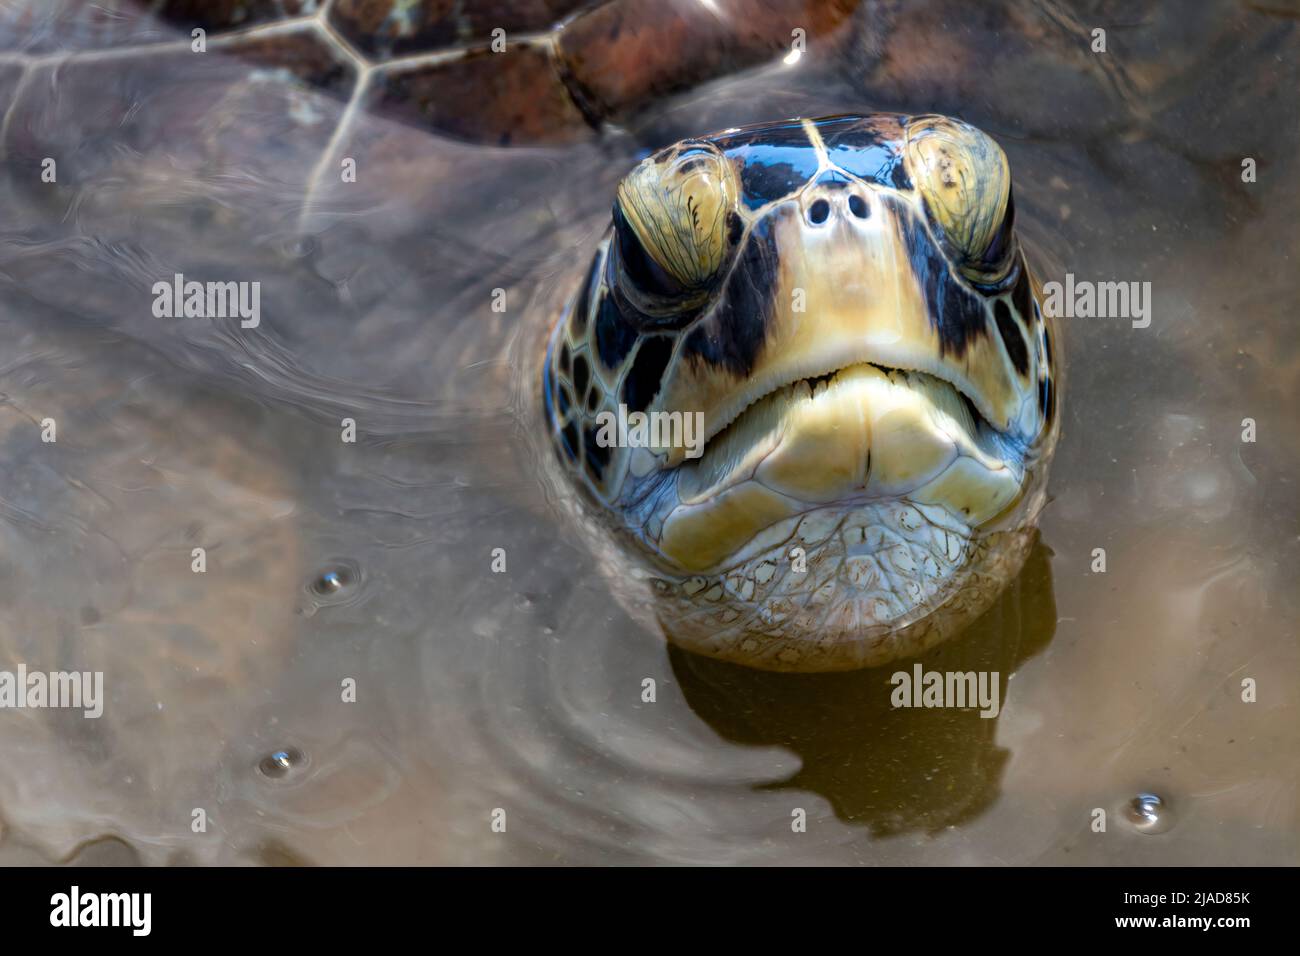 Close-up of a Green Sea Turtle (Chelonia mydas) in ocean peeking out of water, Indonesia Stock Photo